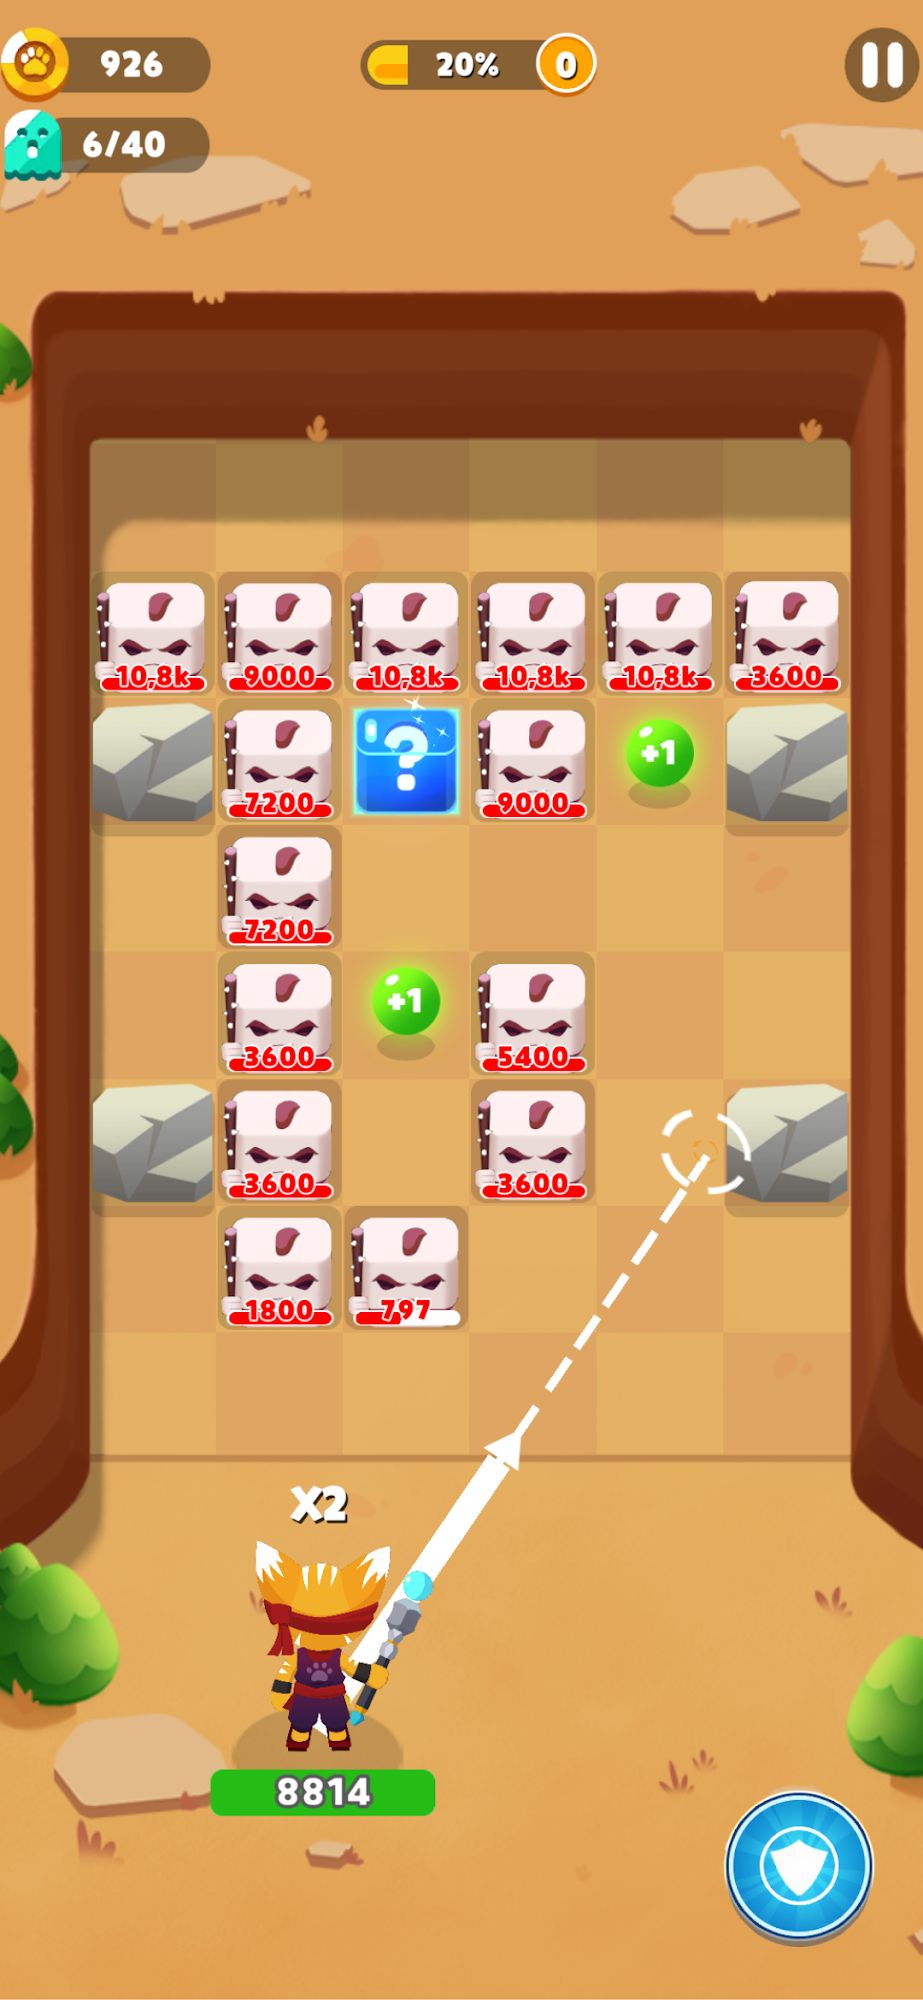 Gameplay of the Monster Crushing Balls for Android phone or tablet.